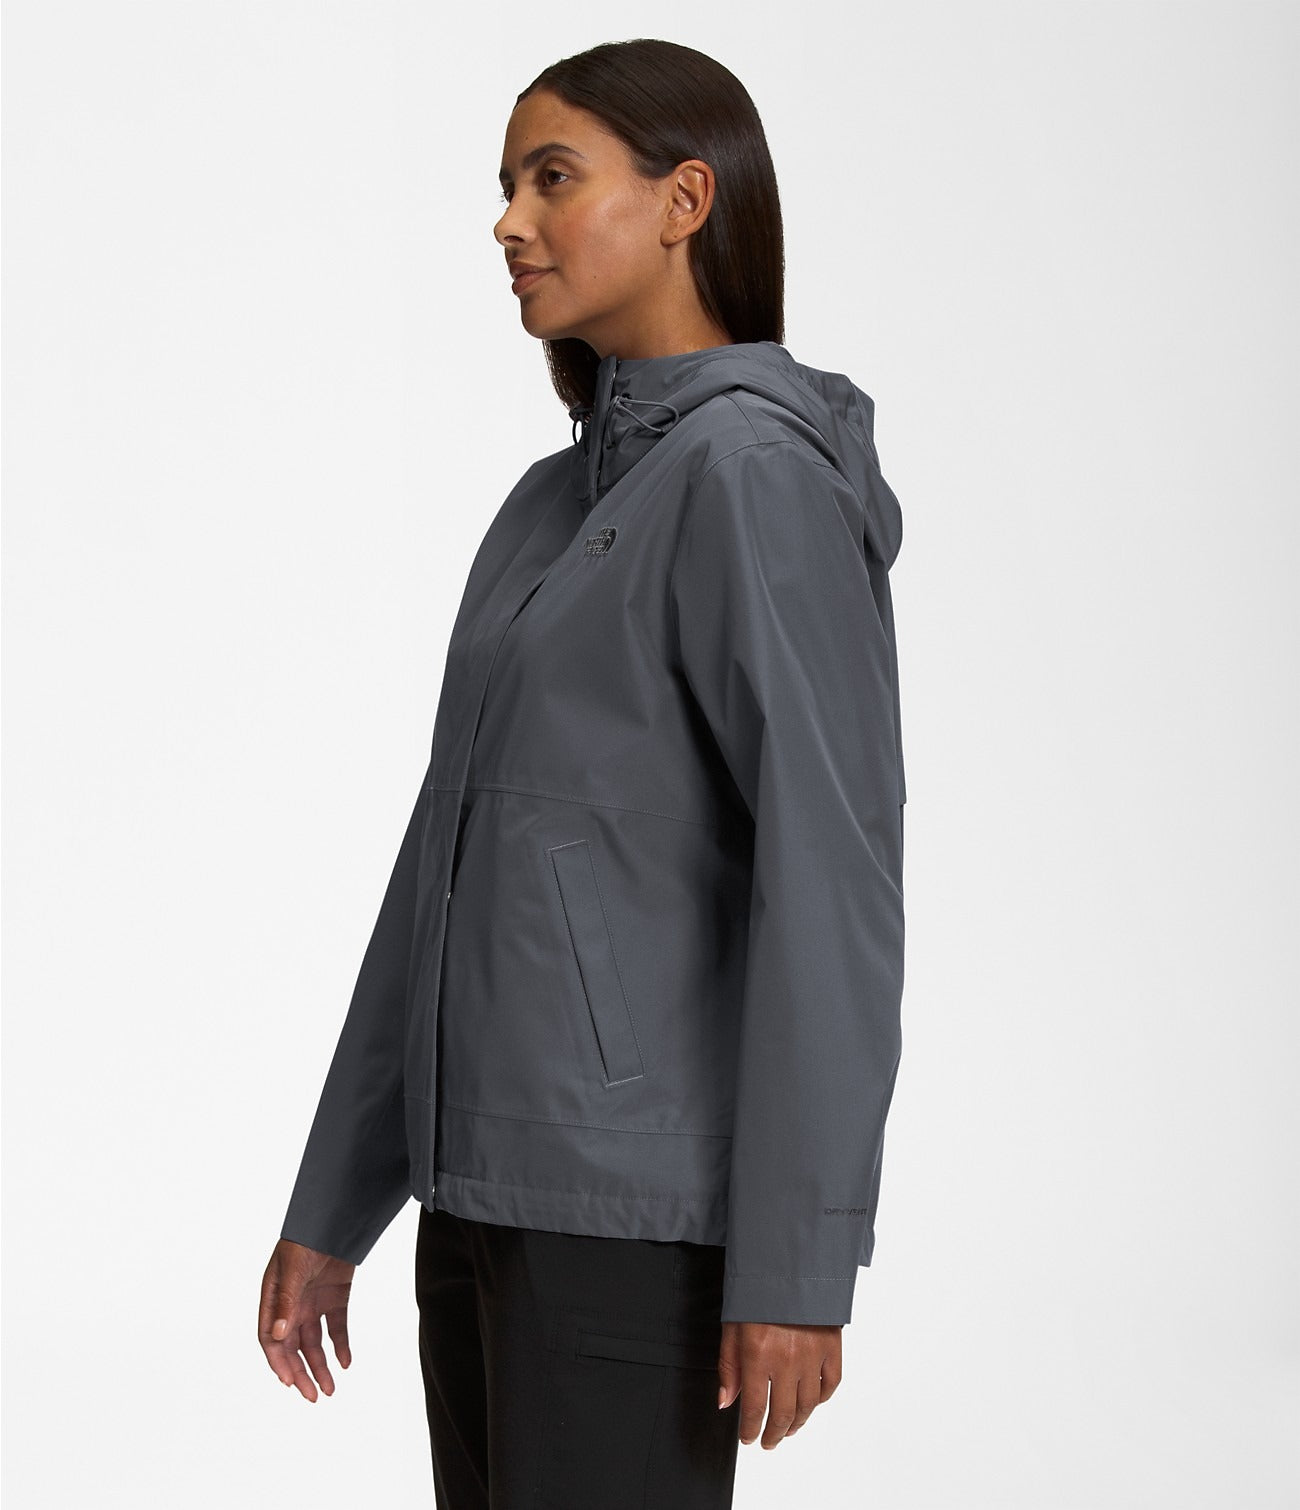 The North Face Women's Woodmont Jacket